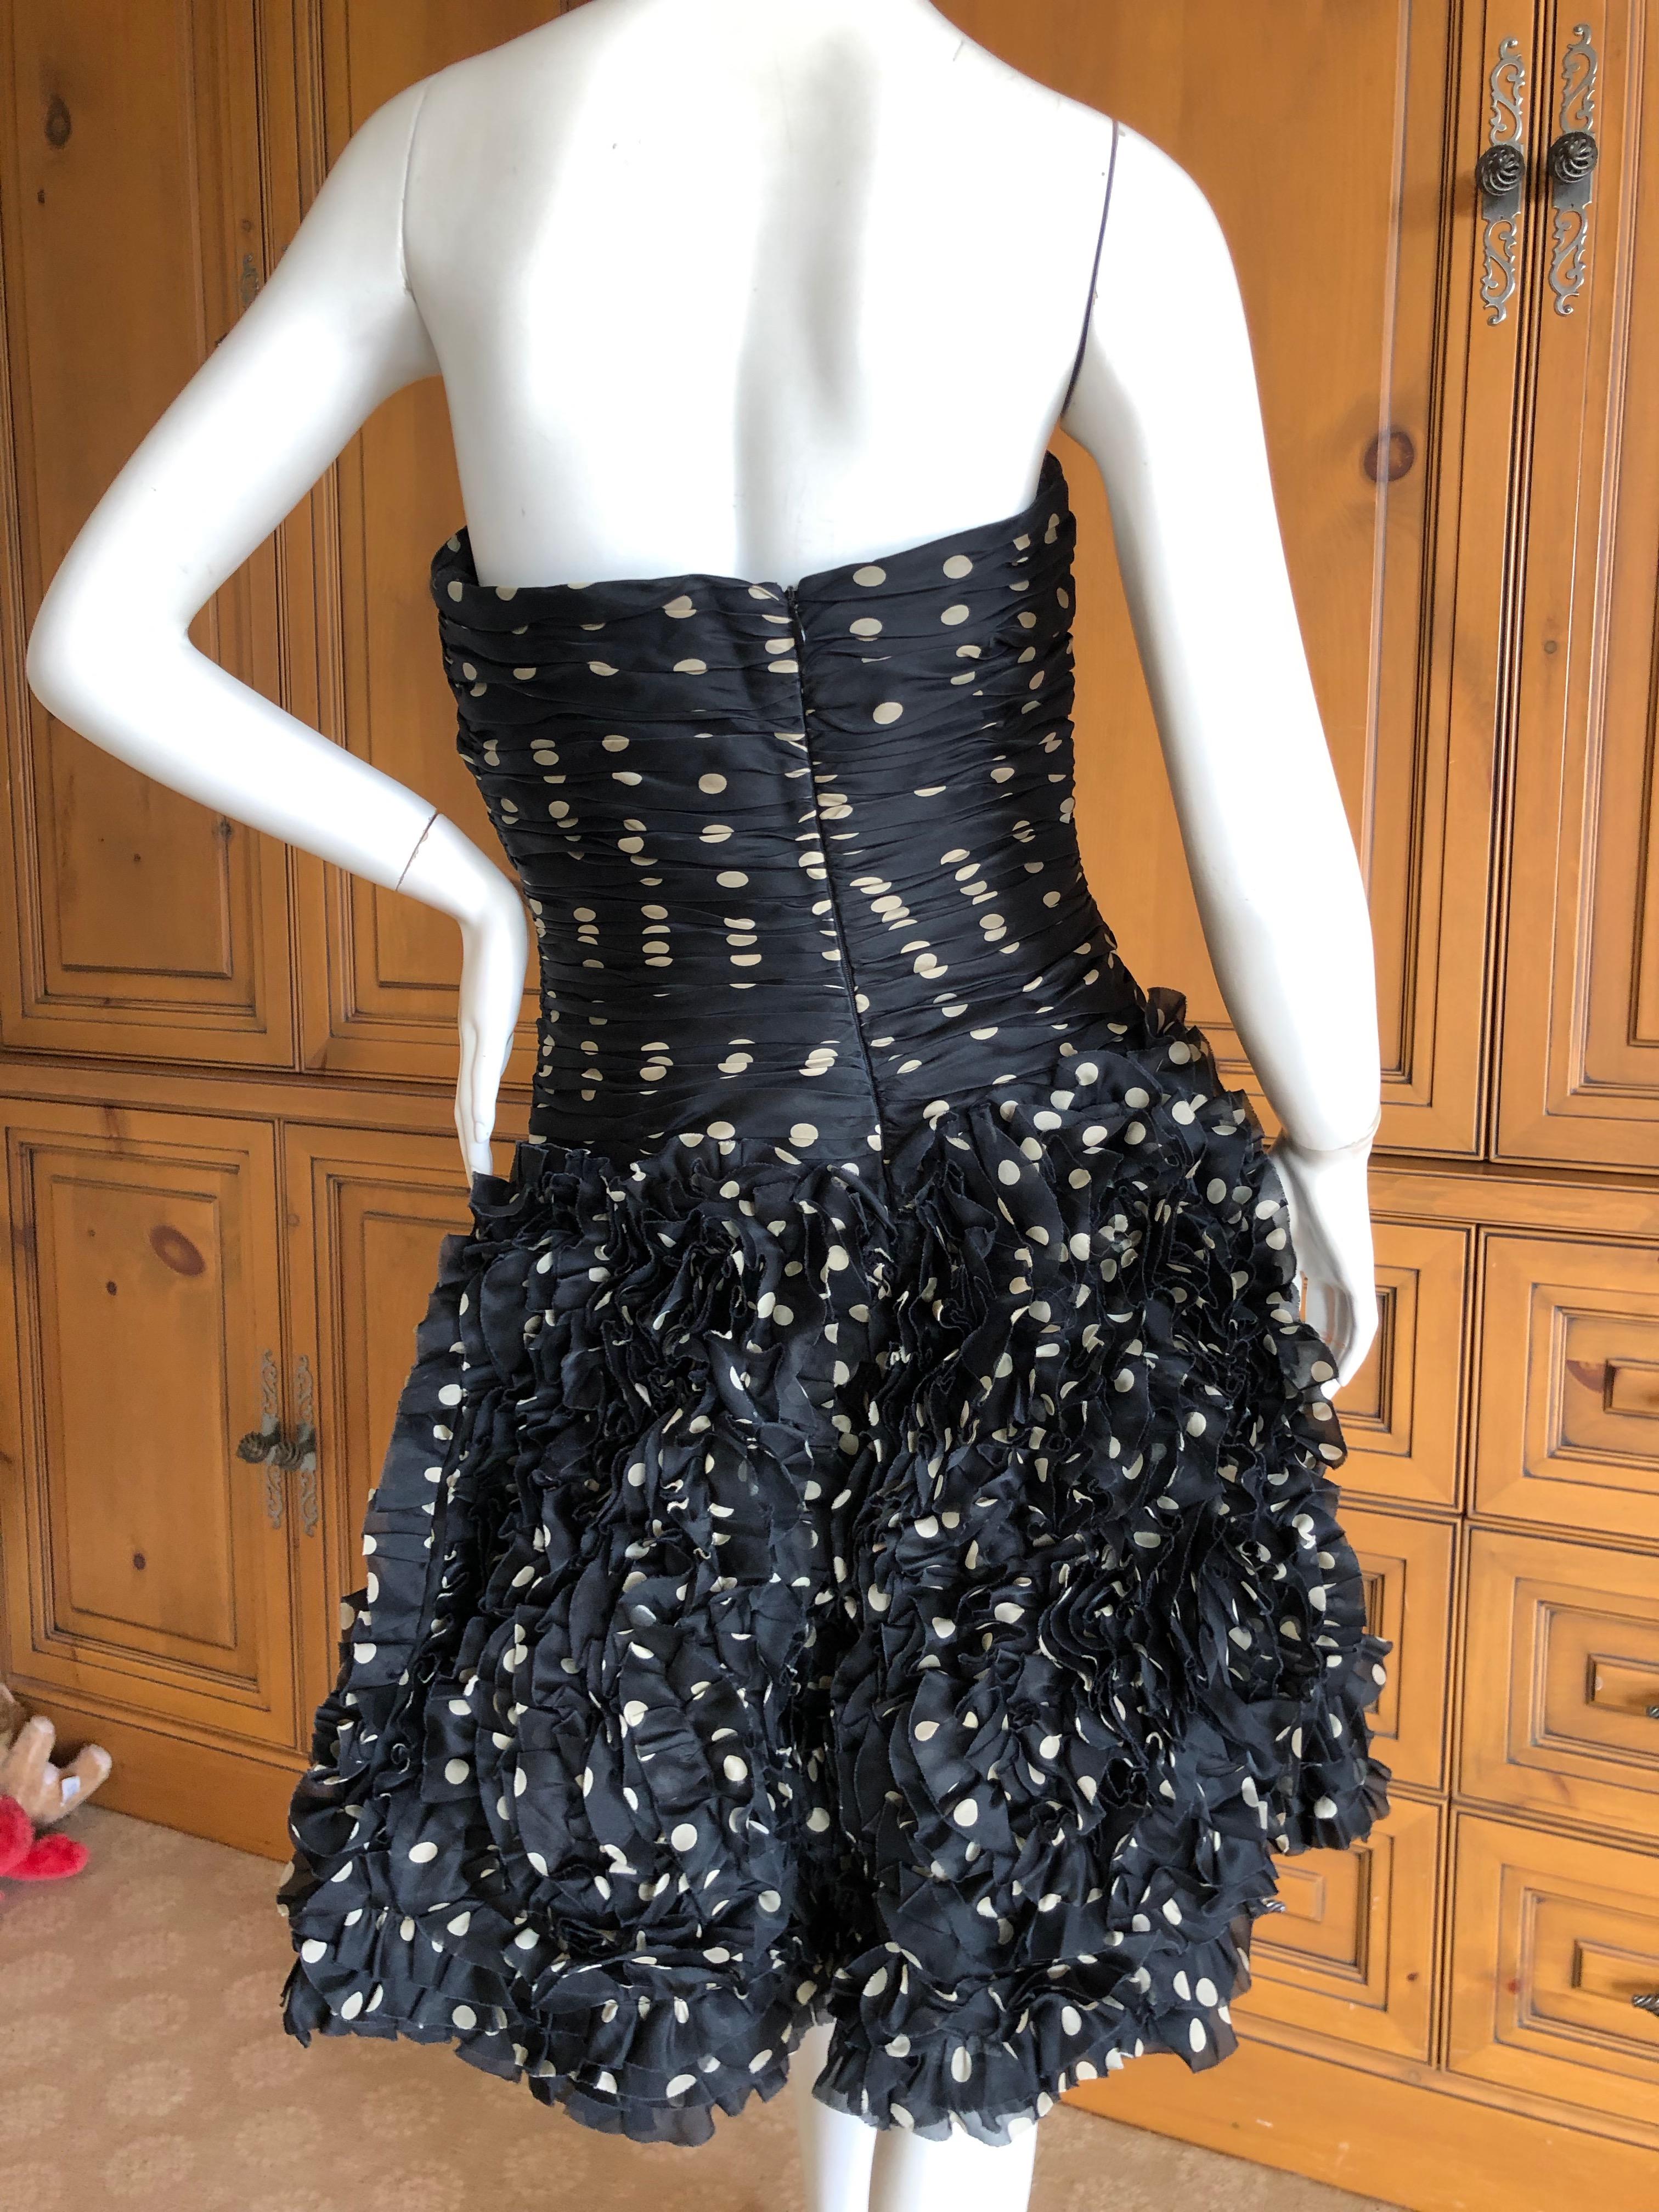 Vicky Tiel Paris 80's Strapless Polka Dot Pouf Dress 
The witty quote was 